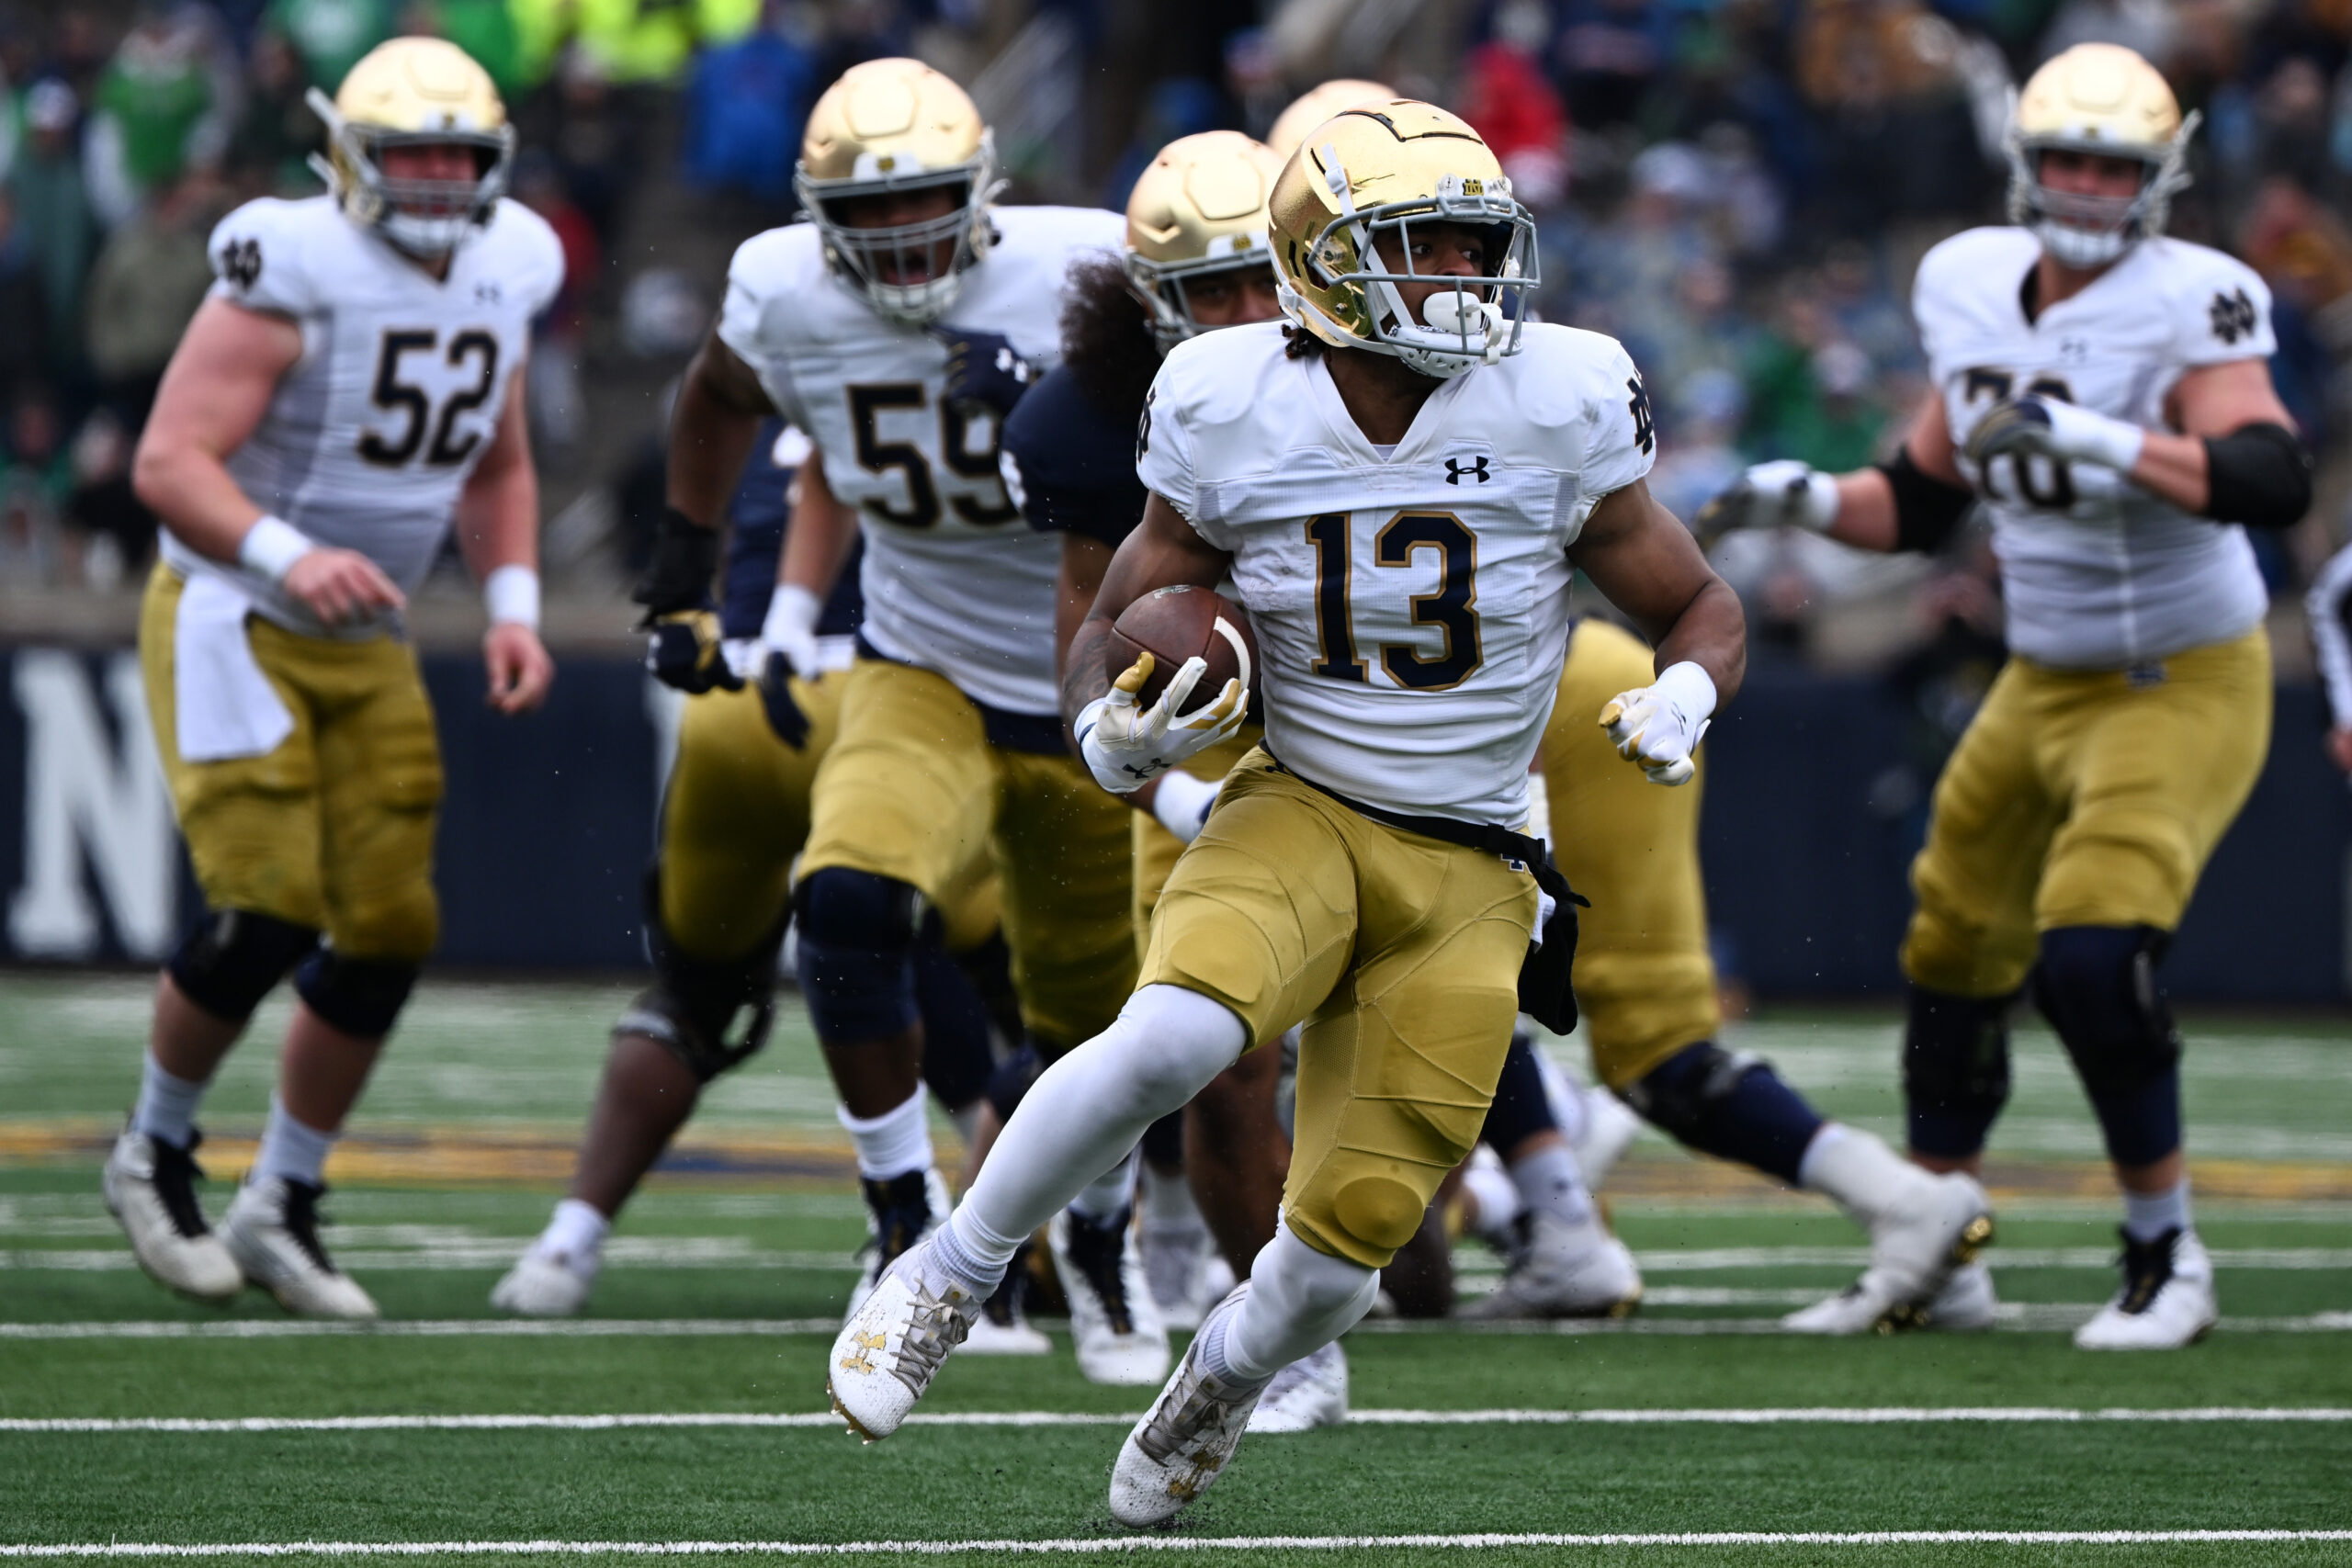 Social media reacts to Notre Dame RB Gi’Bran Payne’s first career TD